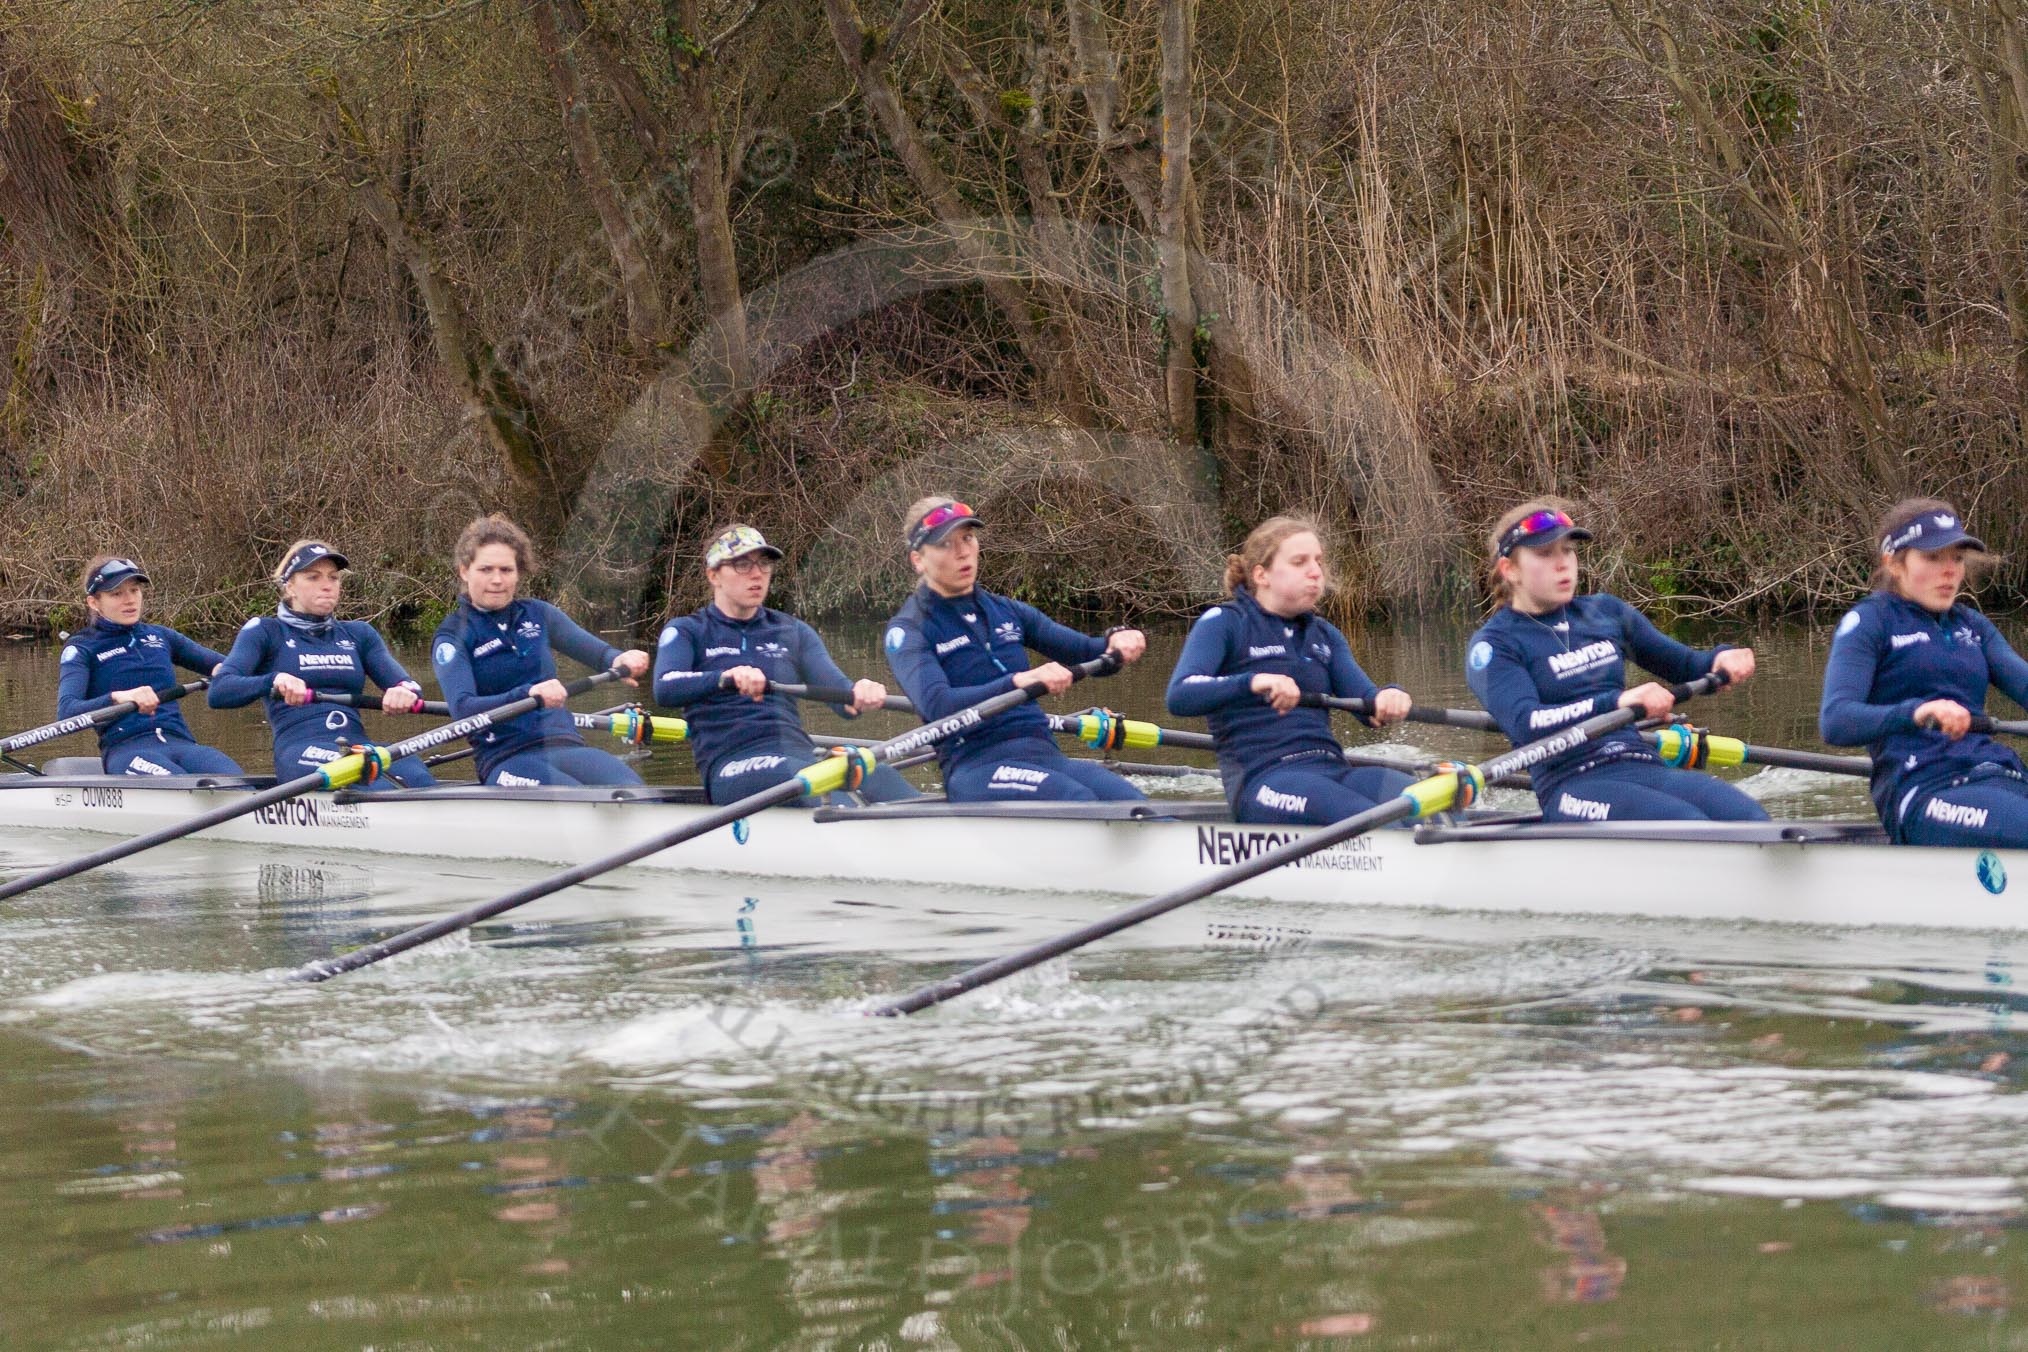 The Boat Race season 2016 - OUWBC training Wallingford: The OUWBC Blue Boat at the start of their training session.
River Thames,
Wallingford,
Oxfordshire,

on 29 February 2016 at 15:53, image #71